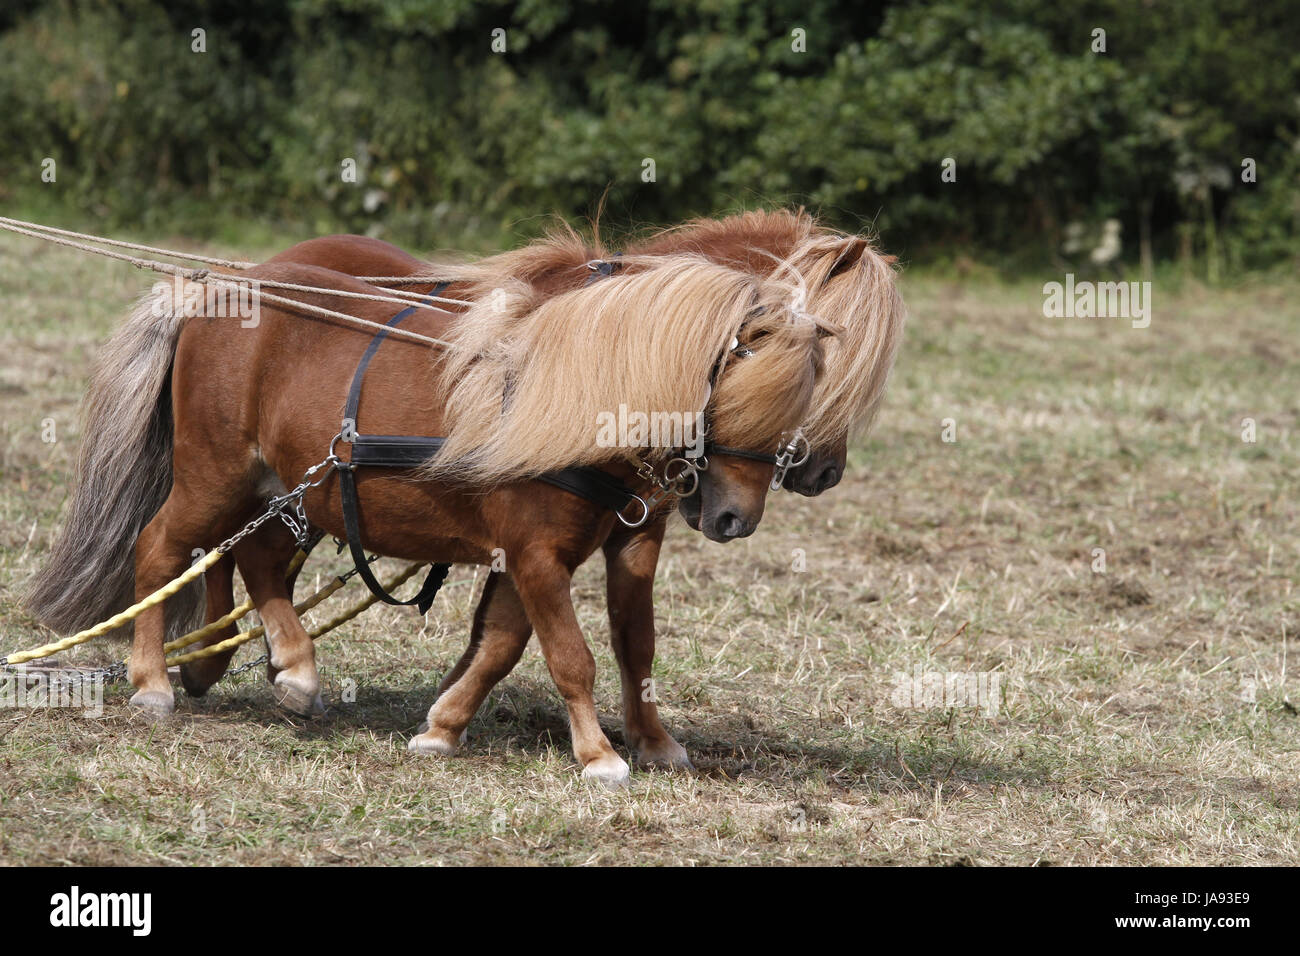 horse, brown, brownish, brunette, strong, small, tiny, little, short, pony, Stock Photo